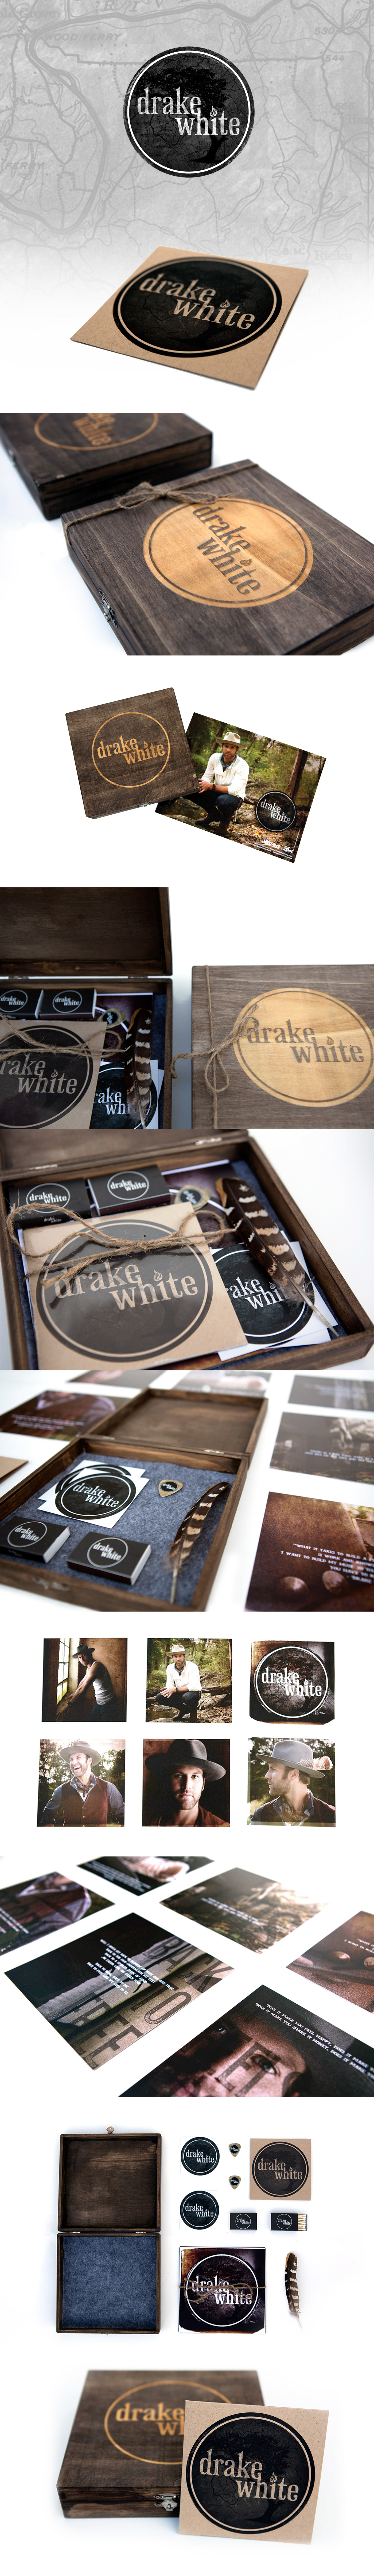 art direction  BMLG Country Music design drake white ep graphic design  package design  Packaging promo